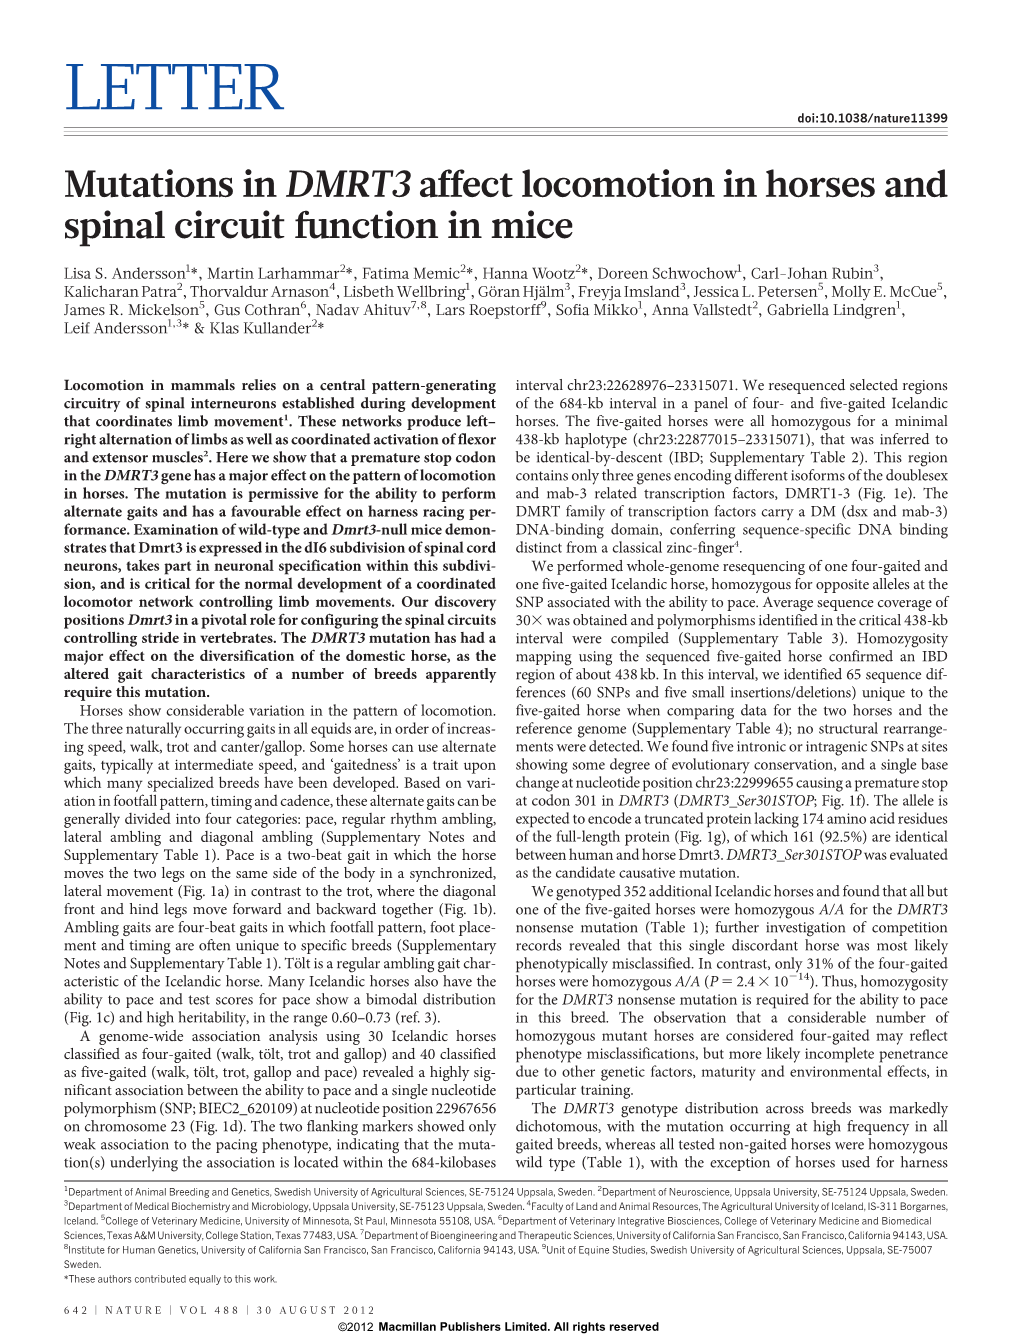 Mutations in DMRT3 Affect Locomotion in Horses and Spinal Circuit Function in Mice